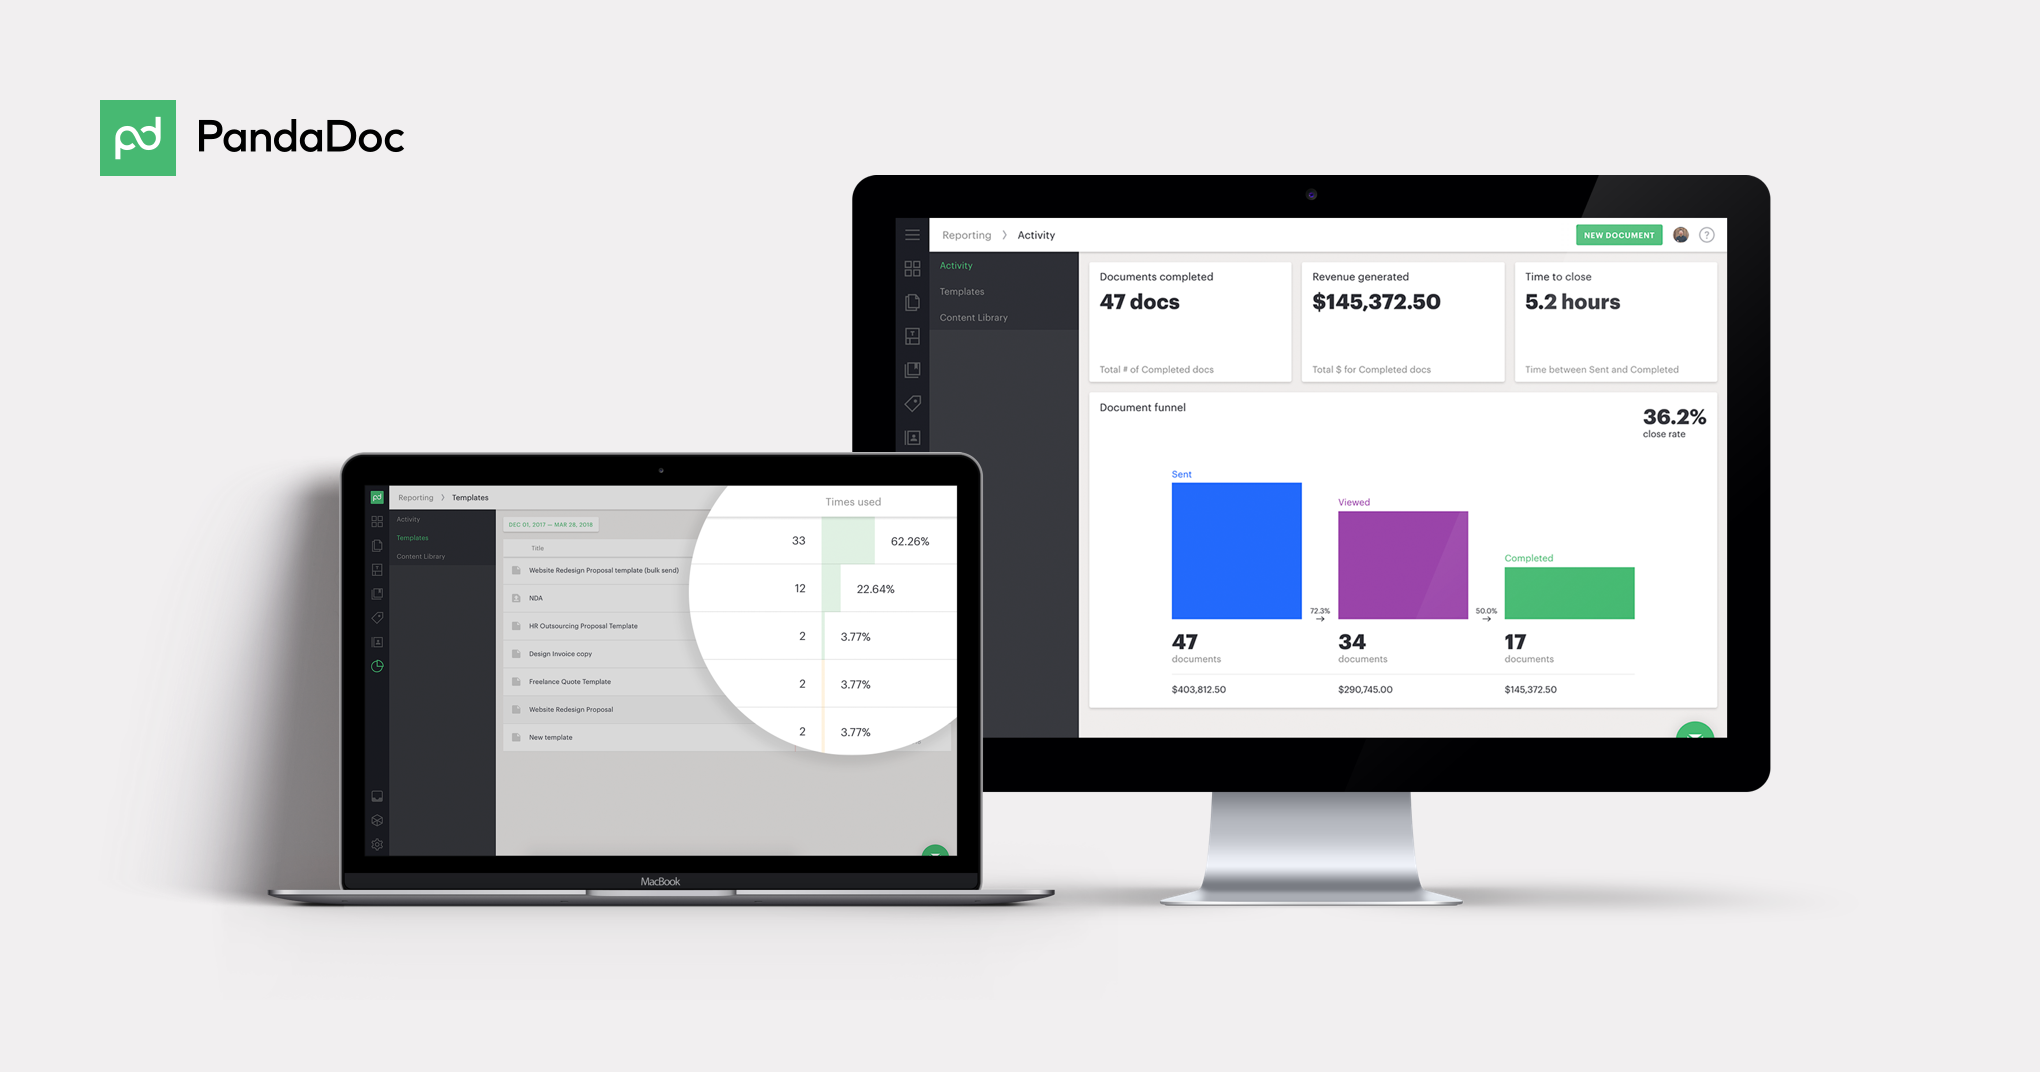 Analyze and improve your sales performance with the new Reporting